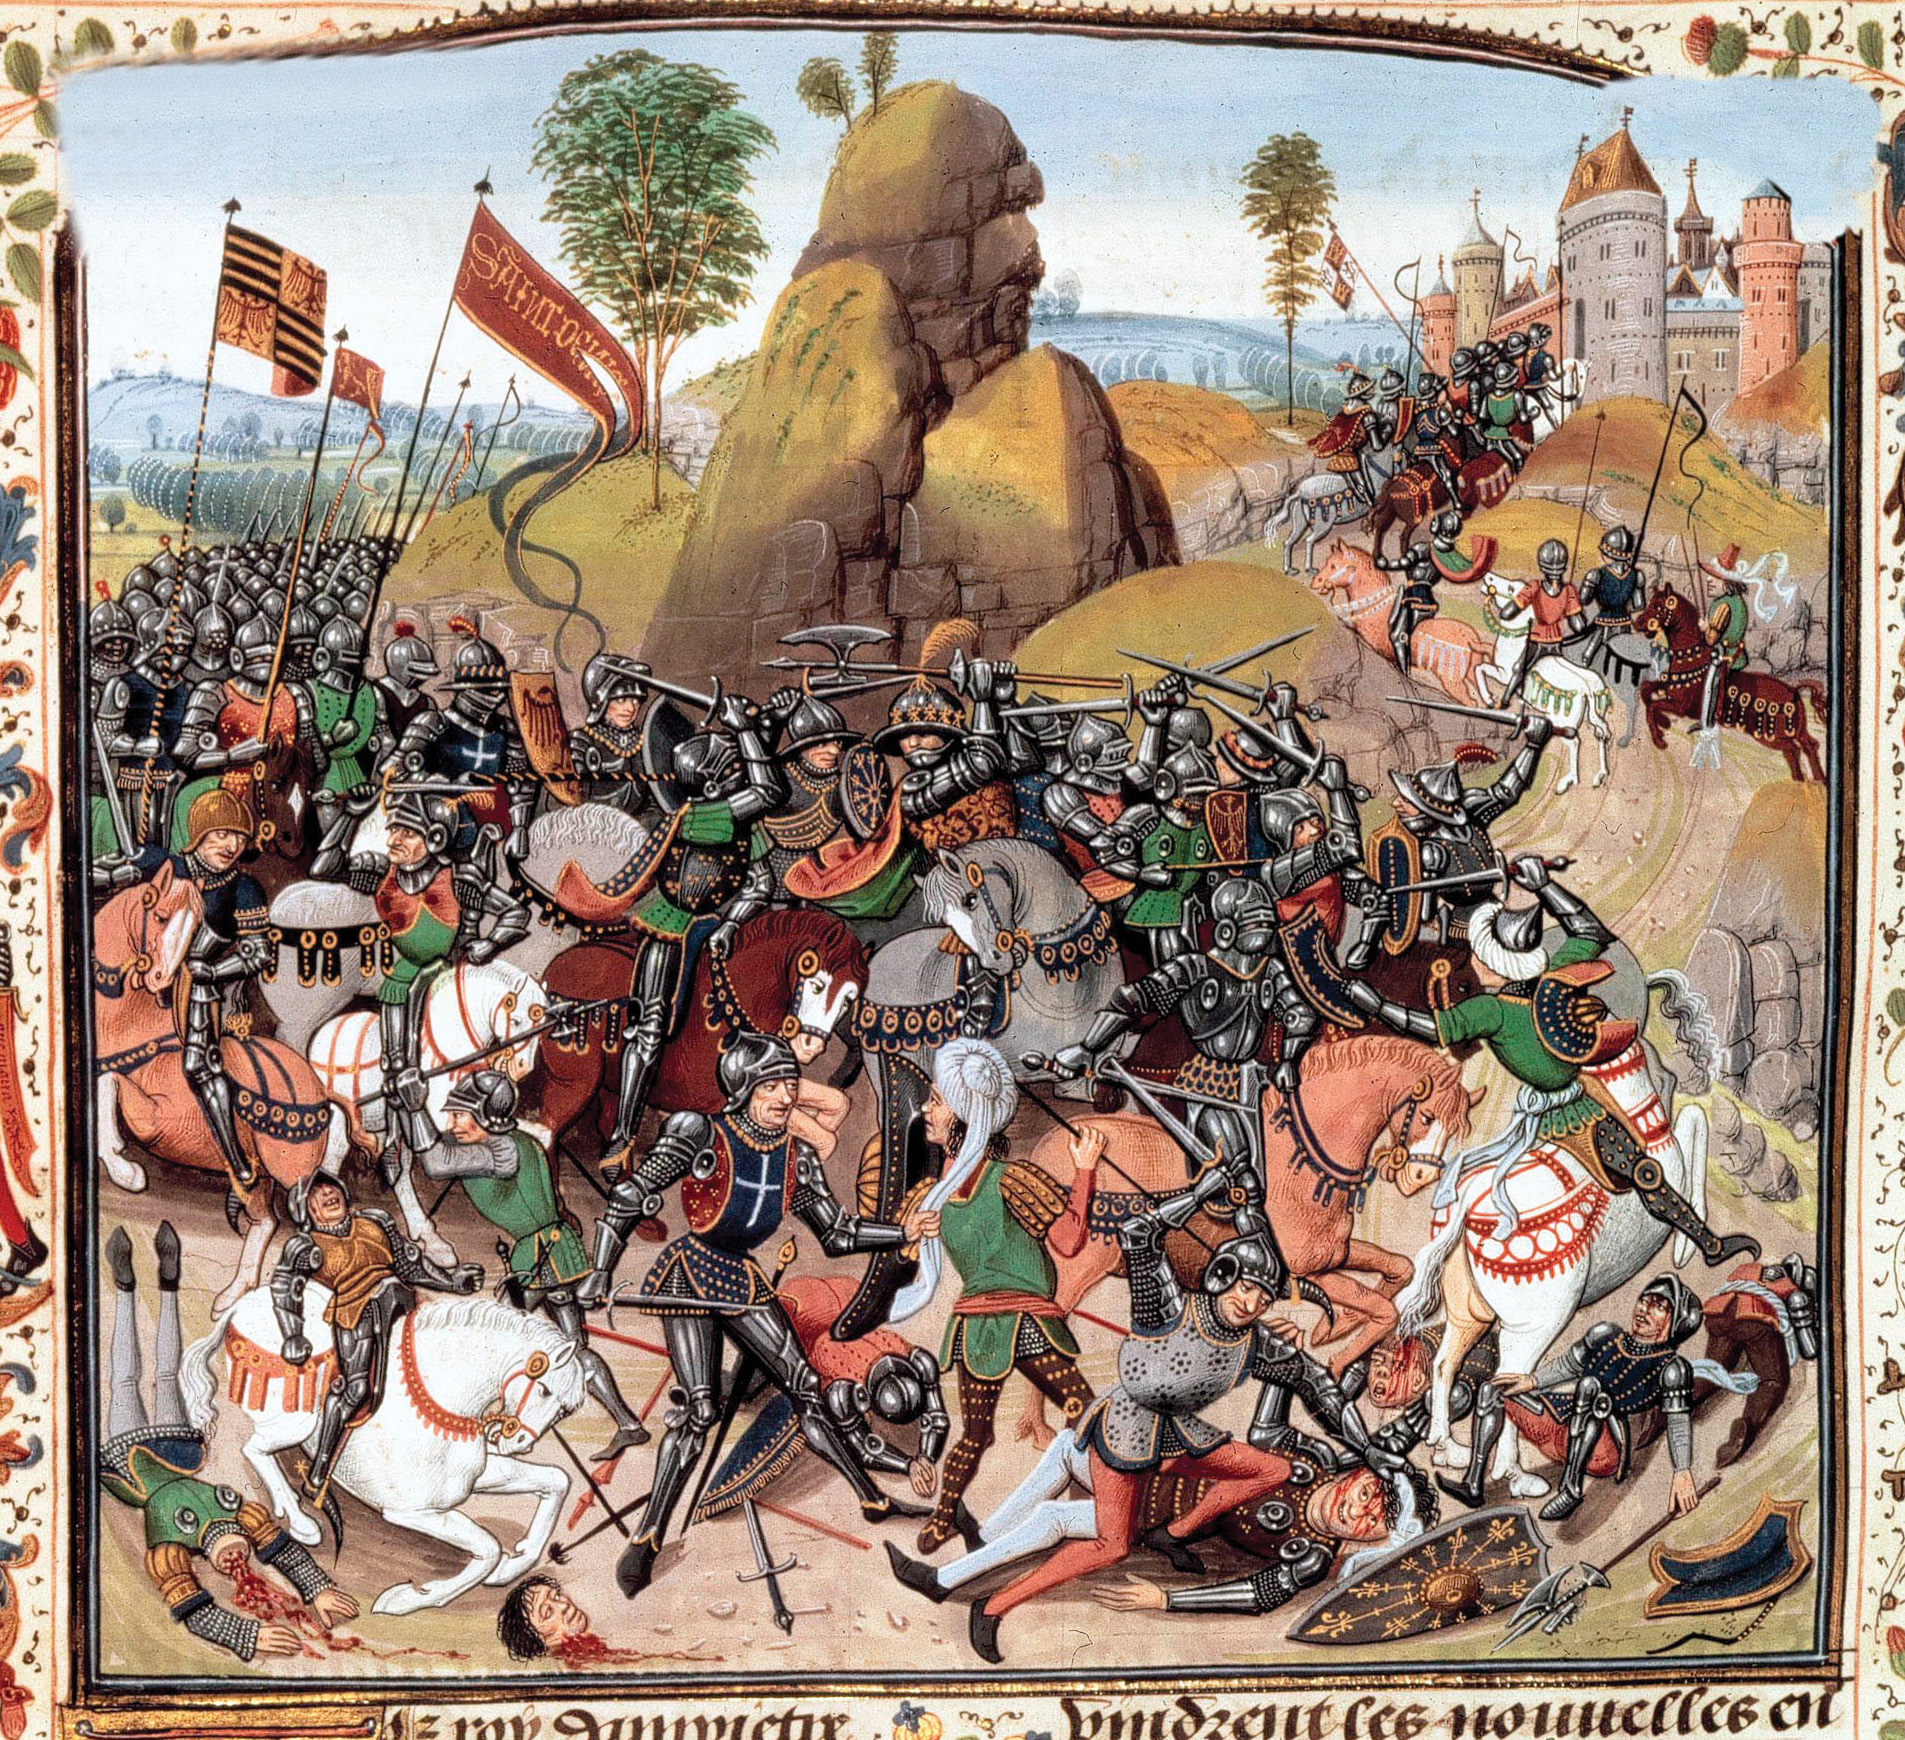 The fighting between the English and the French spilled over into Castile in the 1360s. Both sides sought an alliance with the naval power, and du Guesclin ultimately won the struggle at the Battle of Montiel in March 1369.